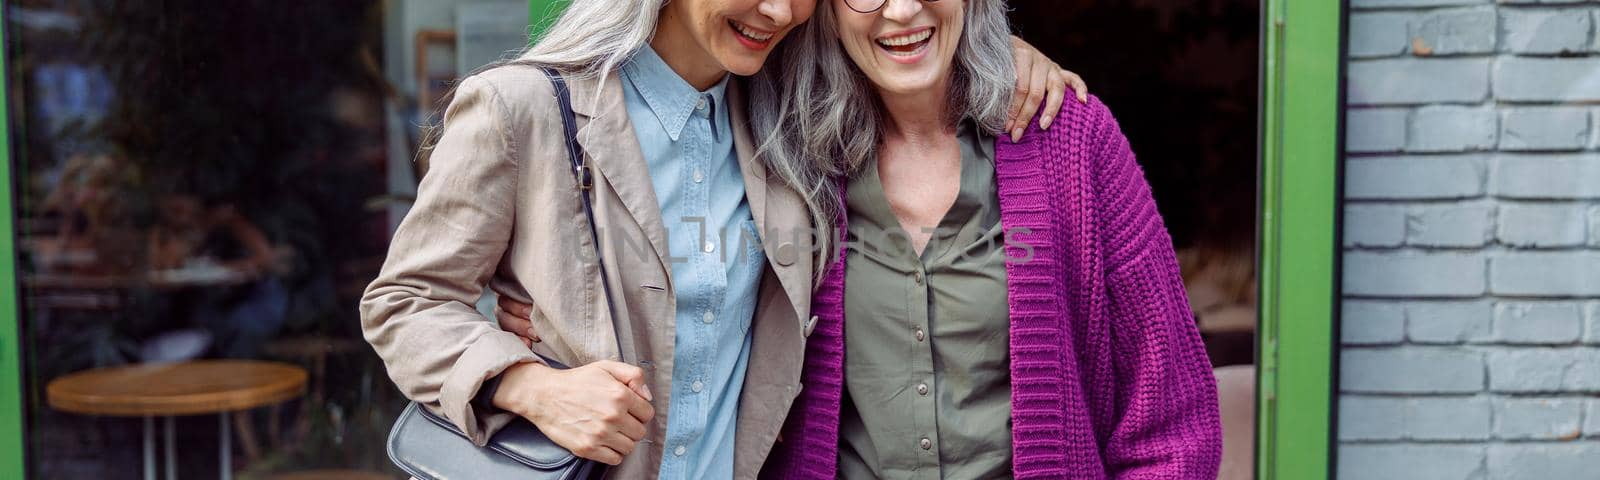 Pretty senior Asian lady hugs grey haired friend in purple jacket standing near cafe entrence on city street. Long-time friendship relationship